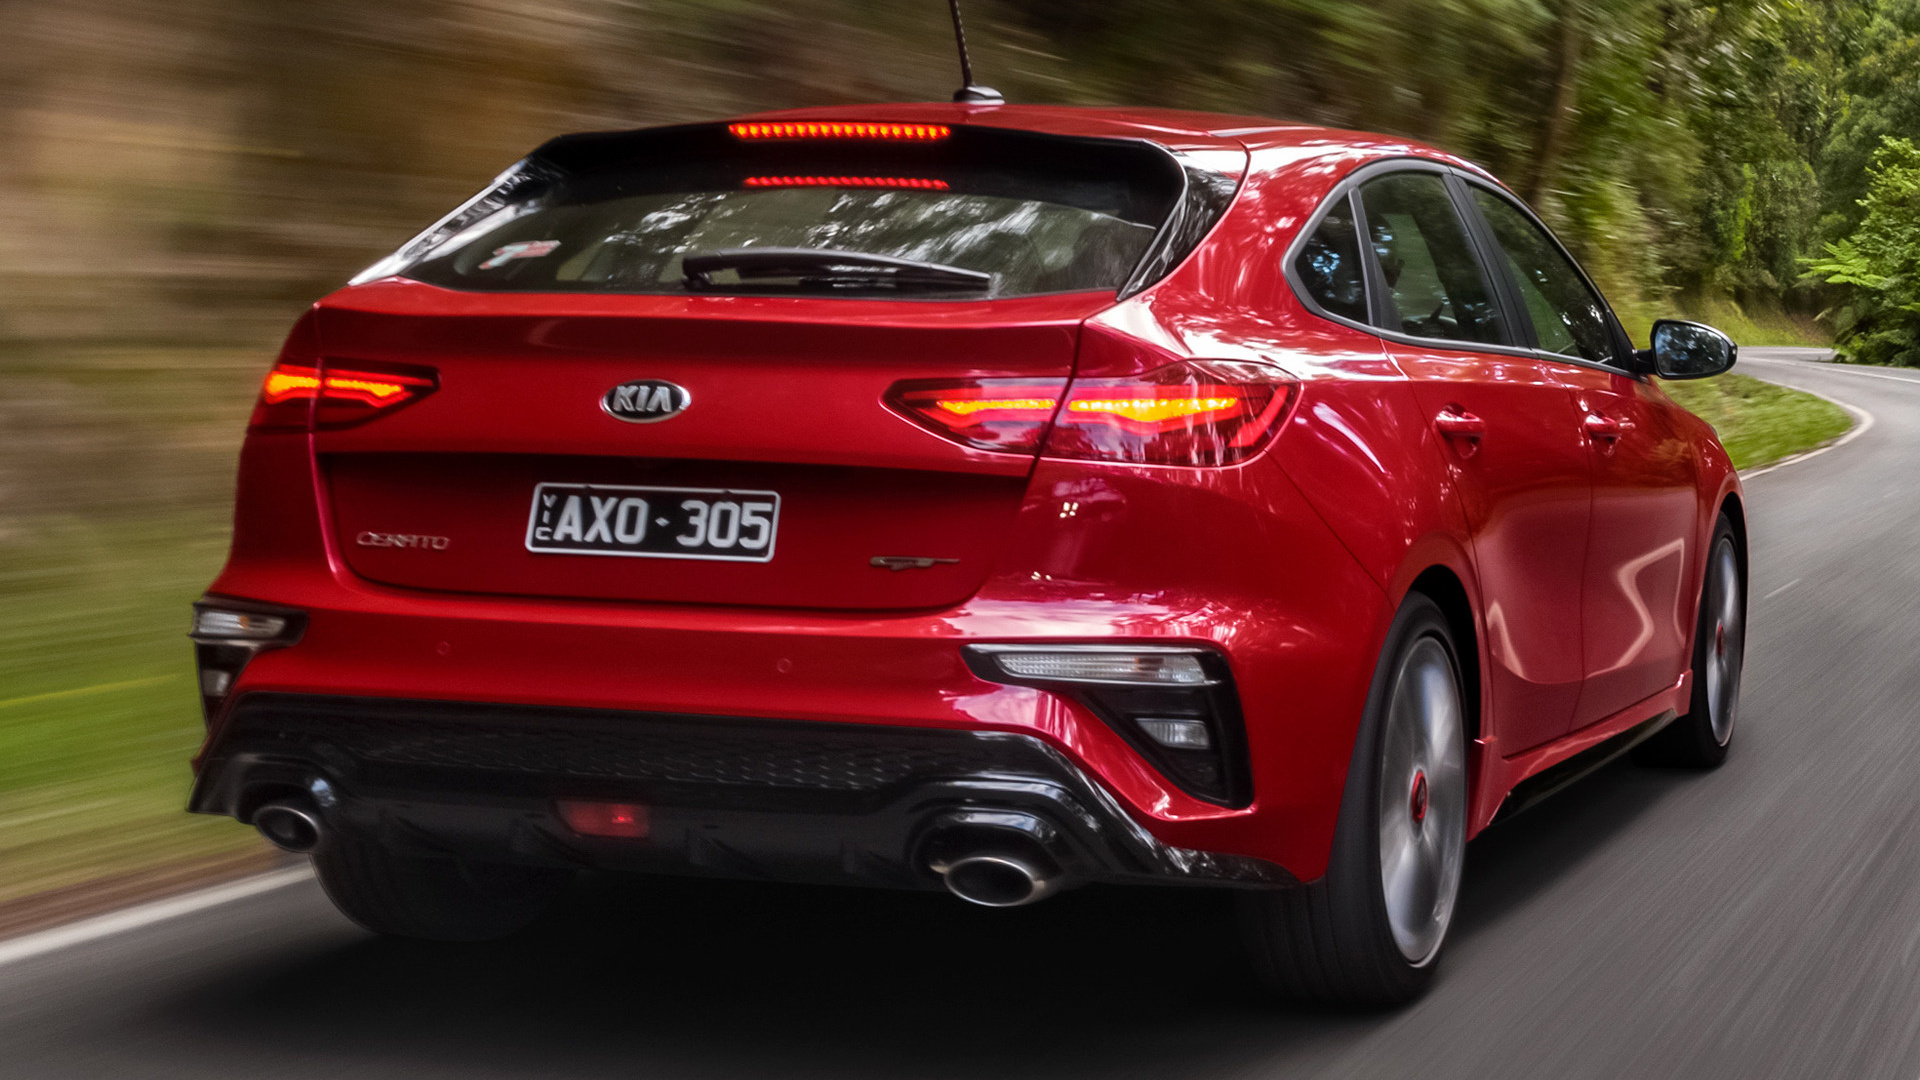 2019 Kia Cerato GT Hatch (AU) - Wallpapers and HD Images | Car Pixel